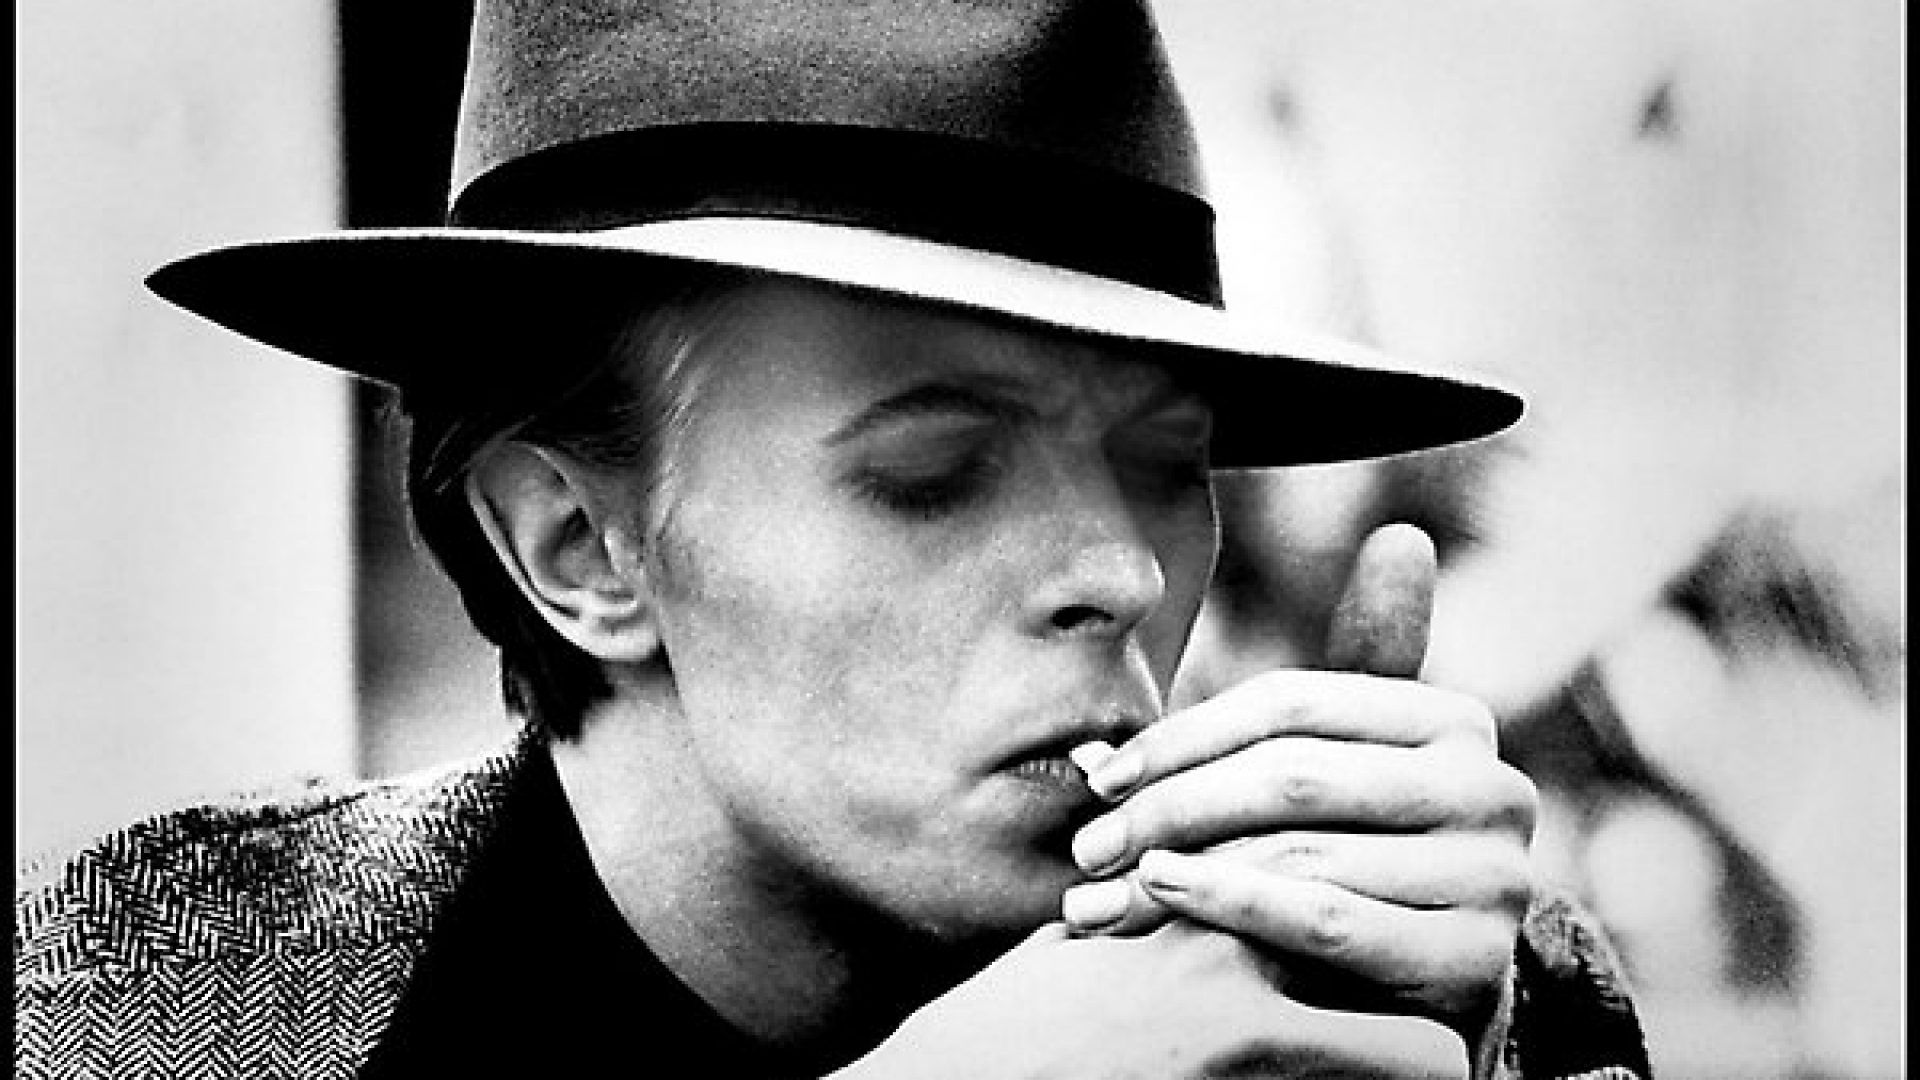 David Bowie photographed by Geoff MacCormack lighting up a Gitane cigarette in 1975